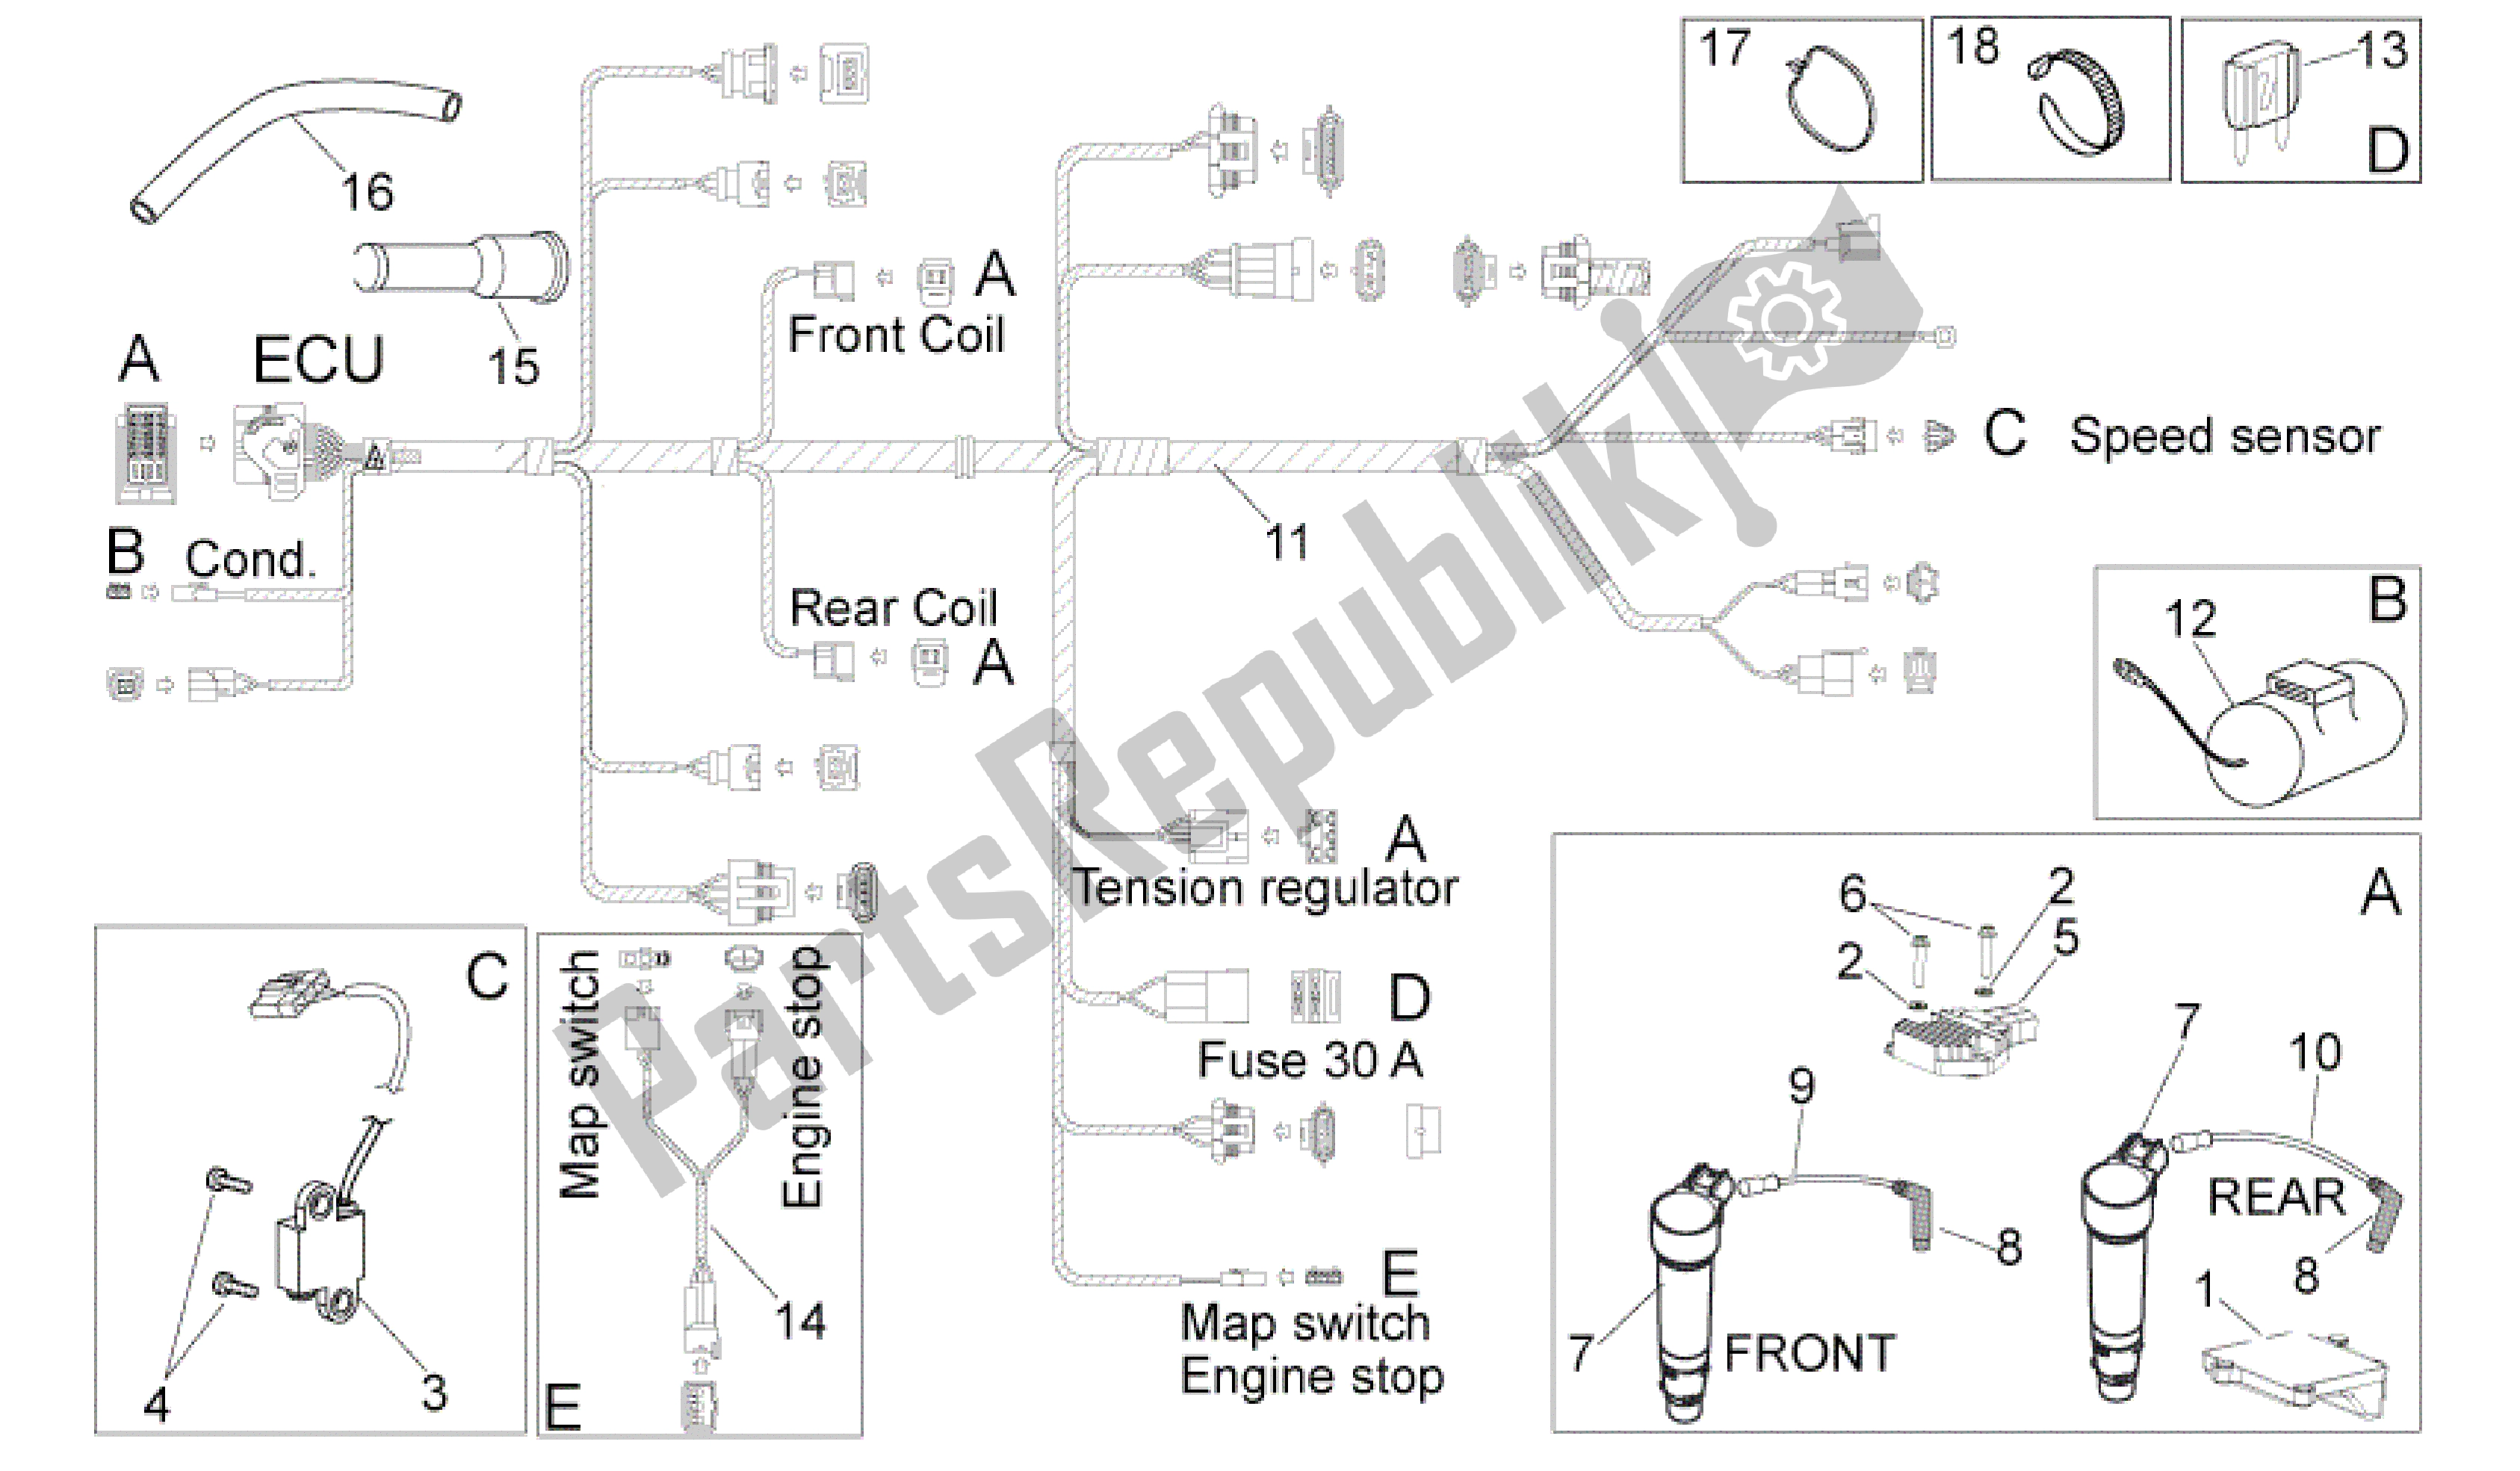 All parts for the Electrical System of the Aprilia MXV 450 2008 - 2010